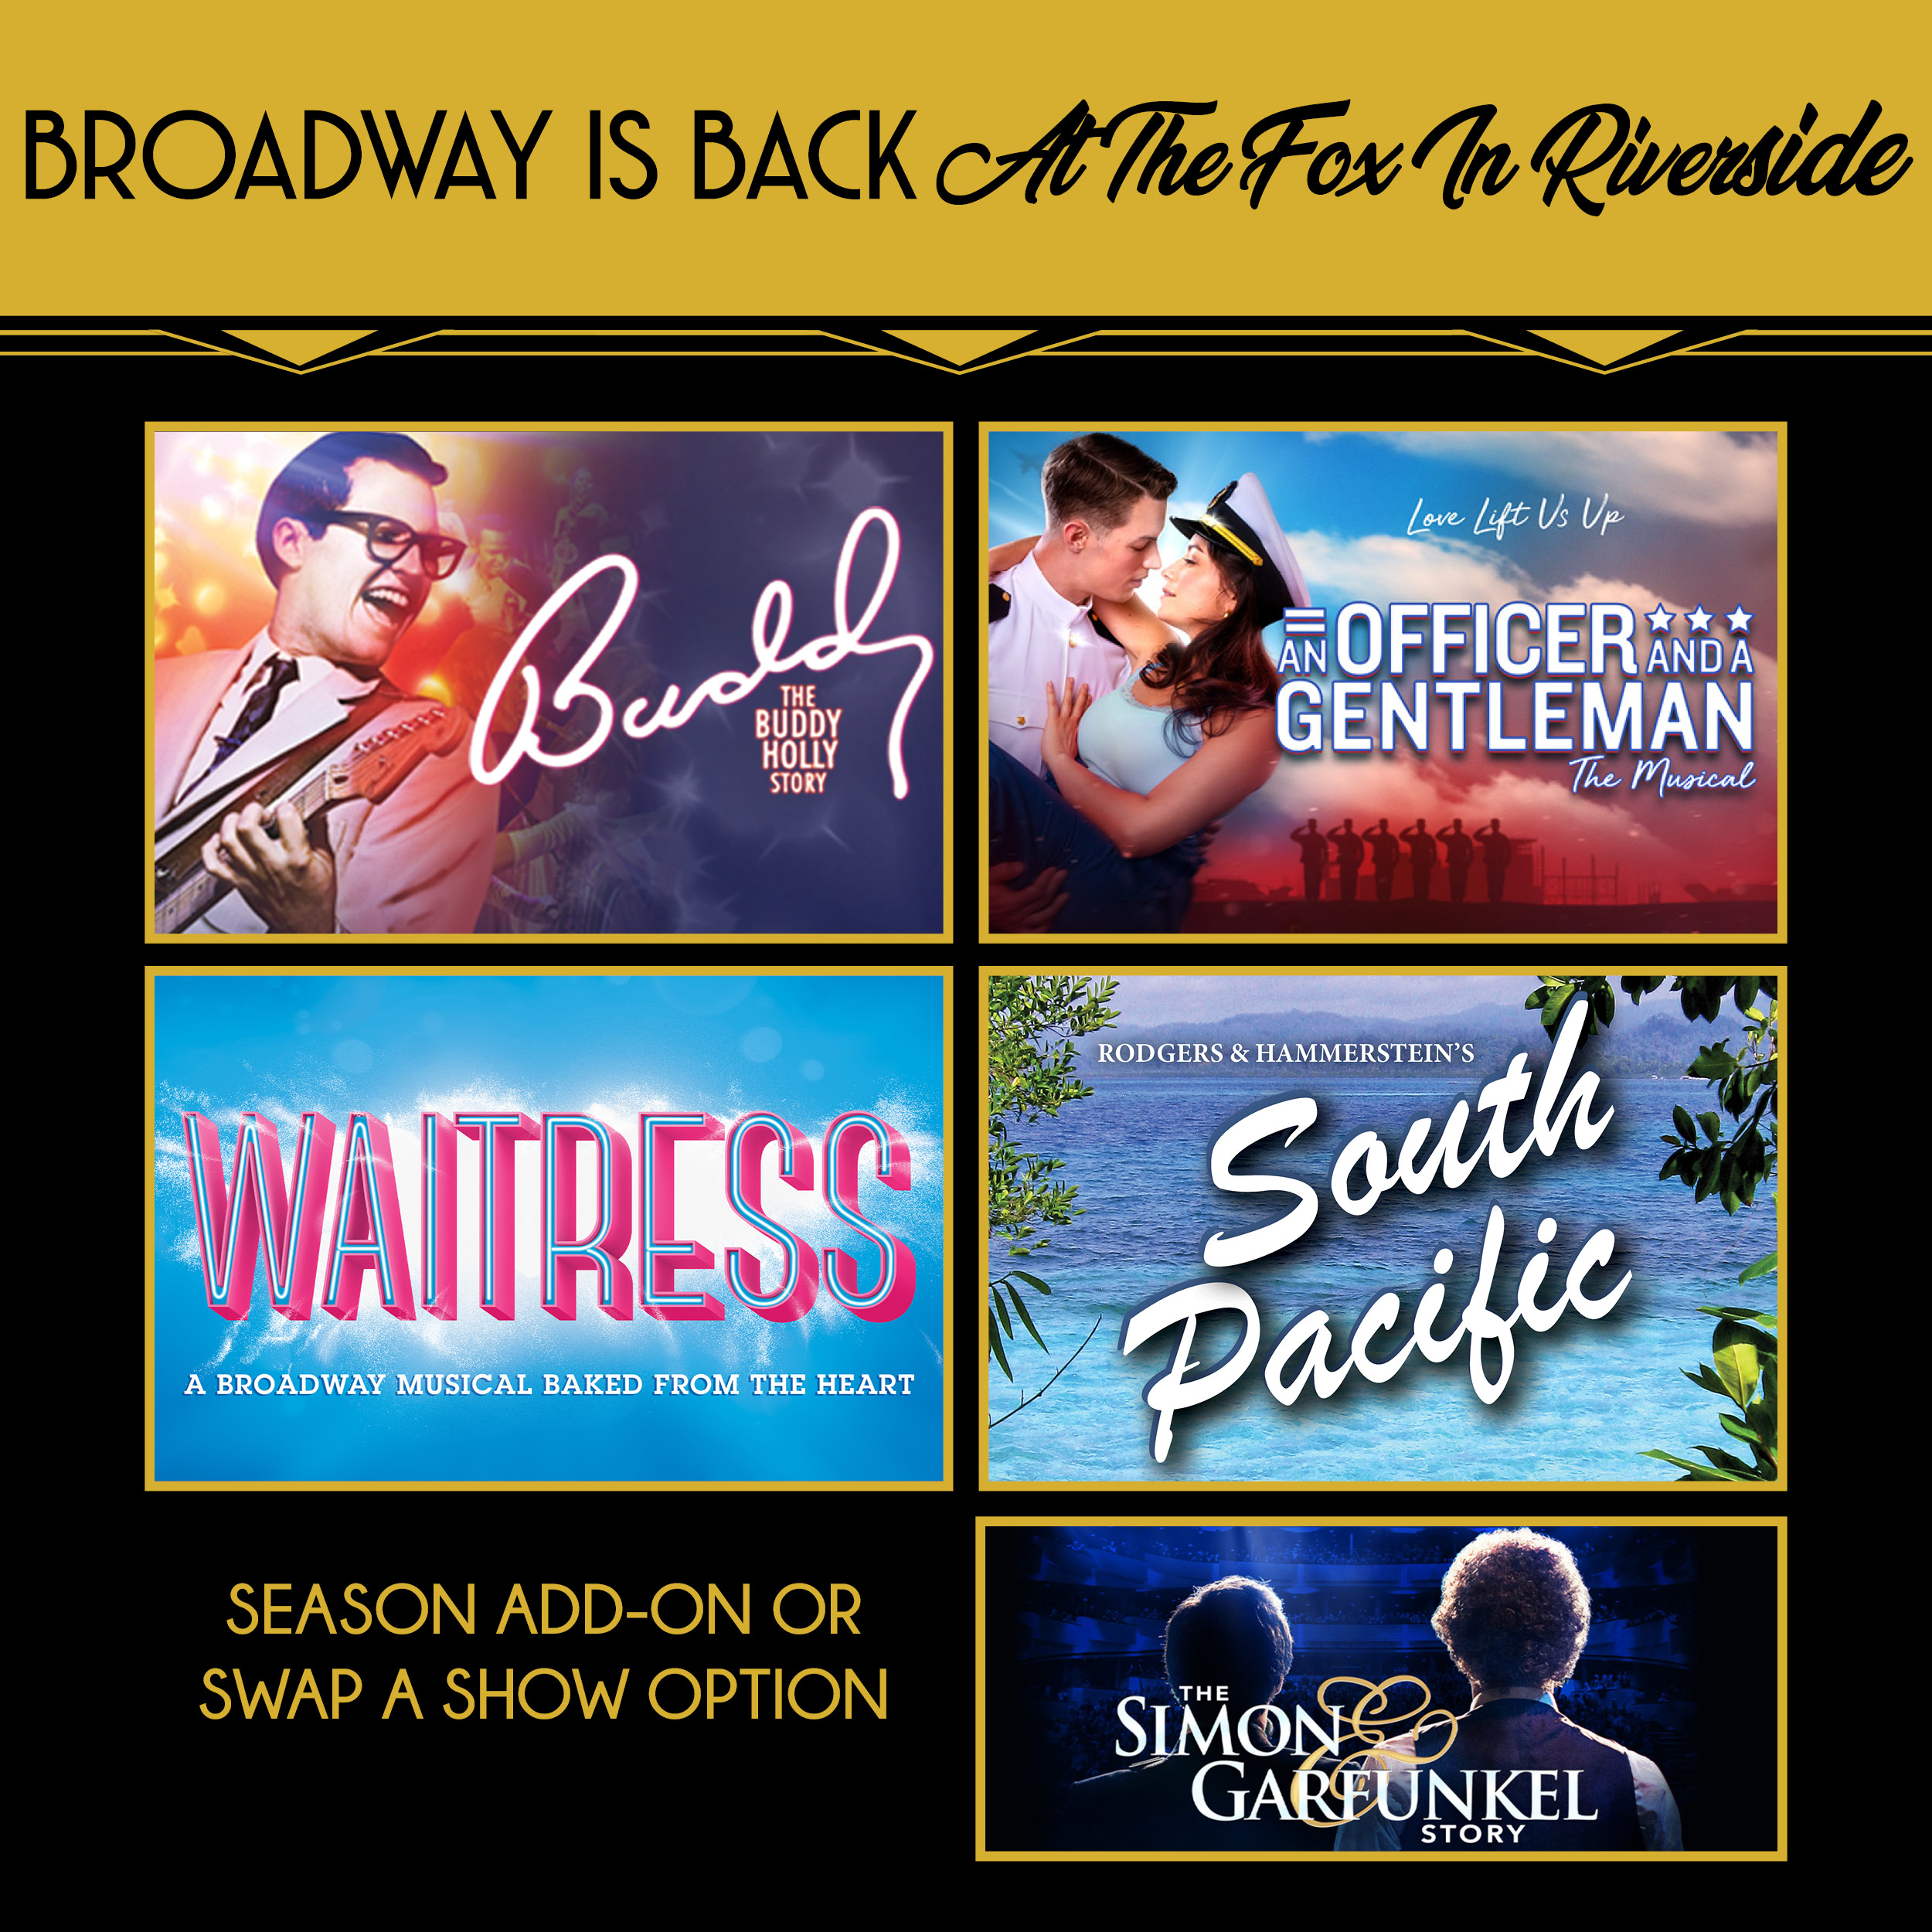 Broadway Series at the Fox